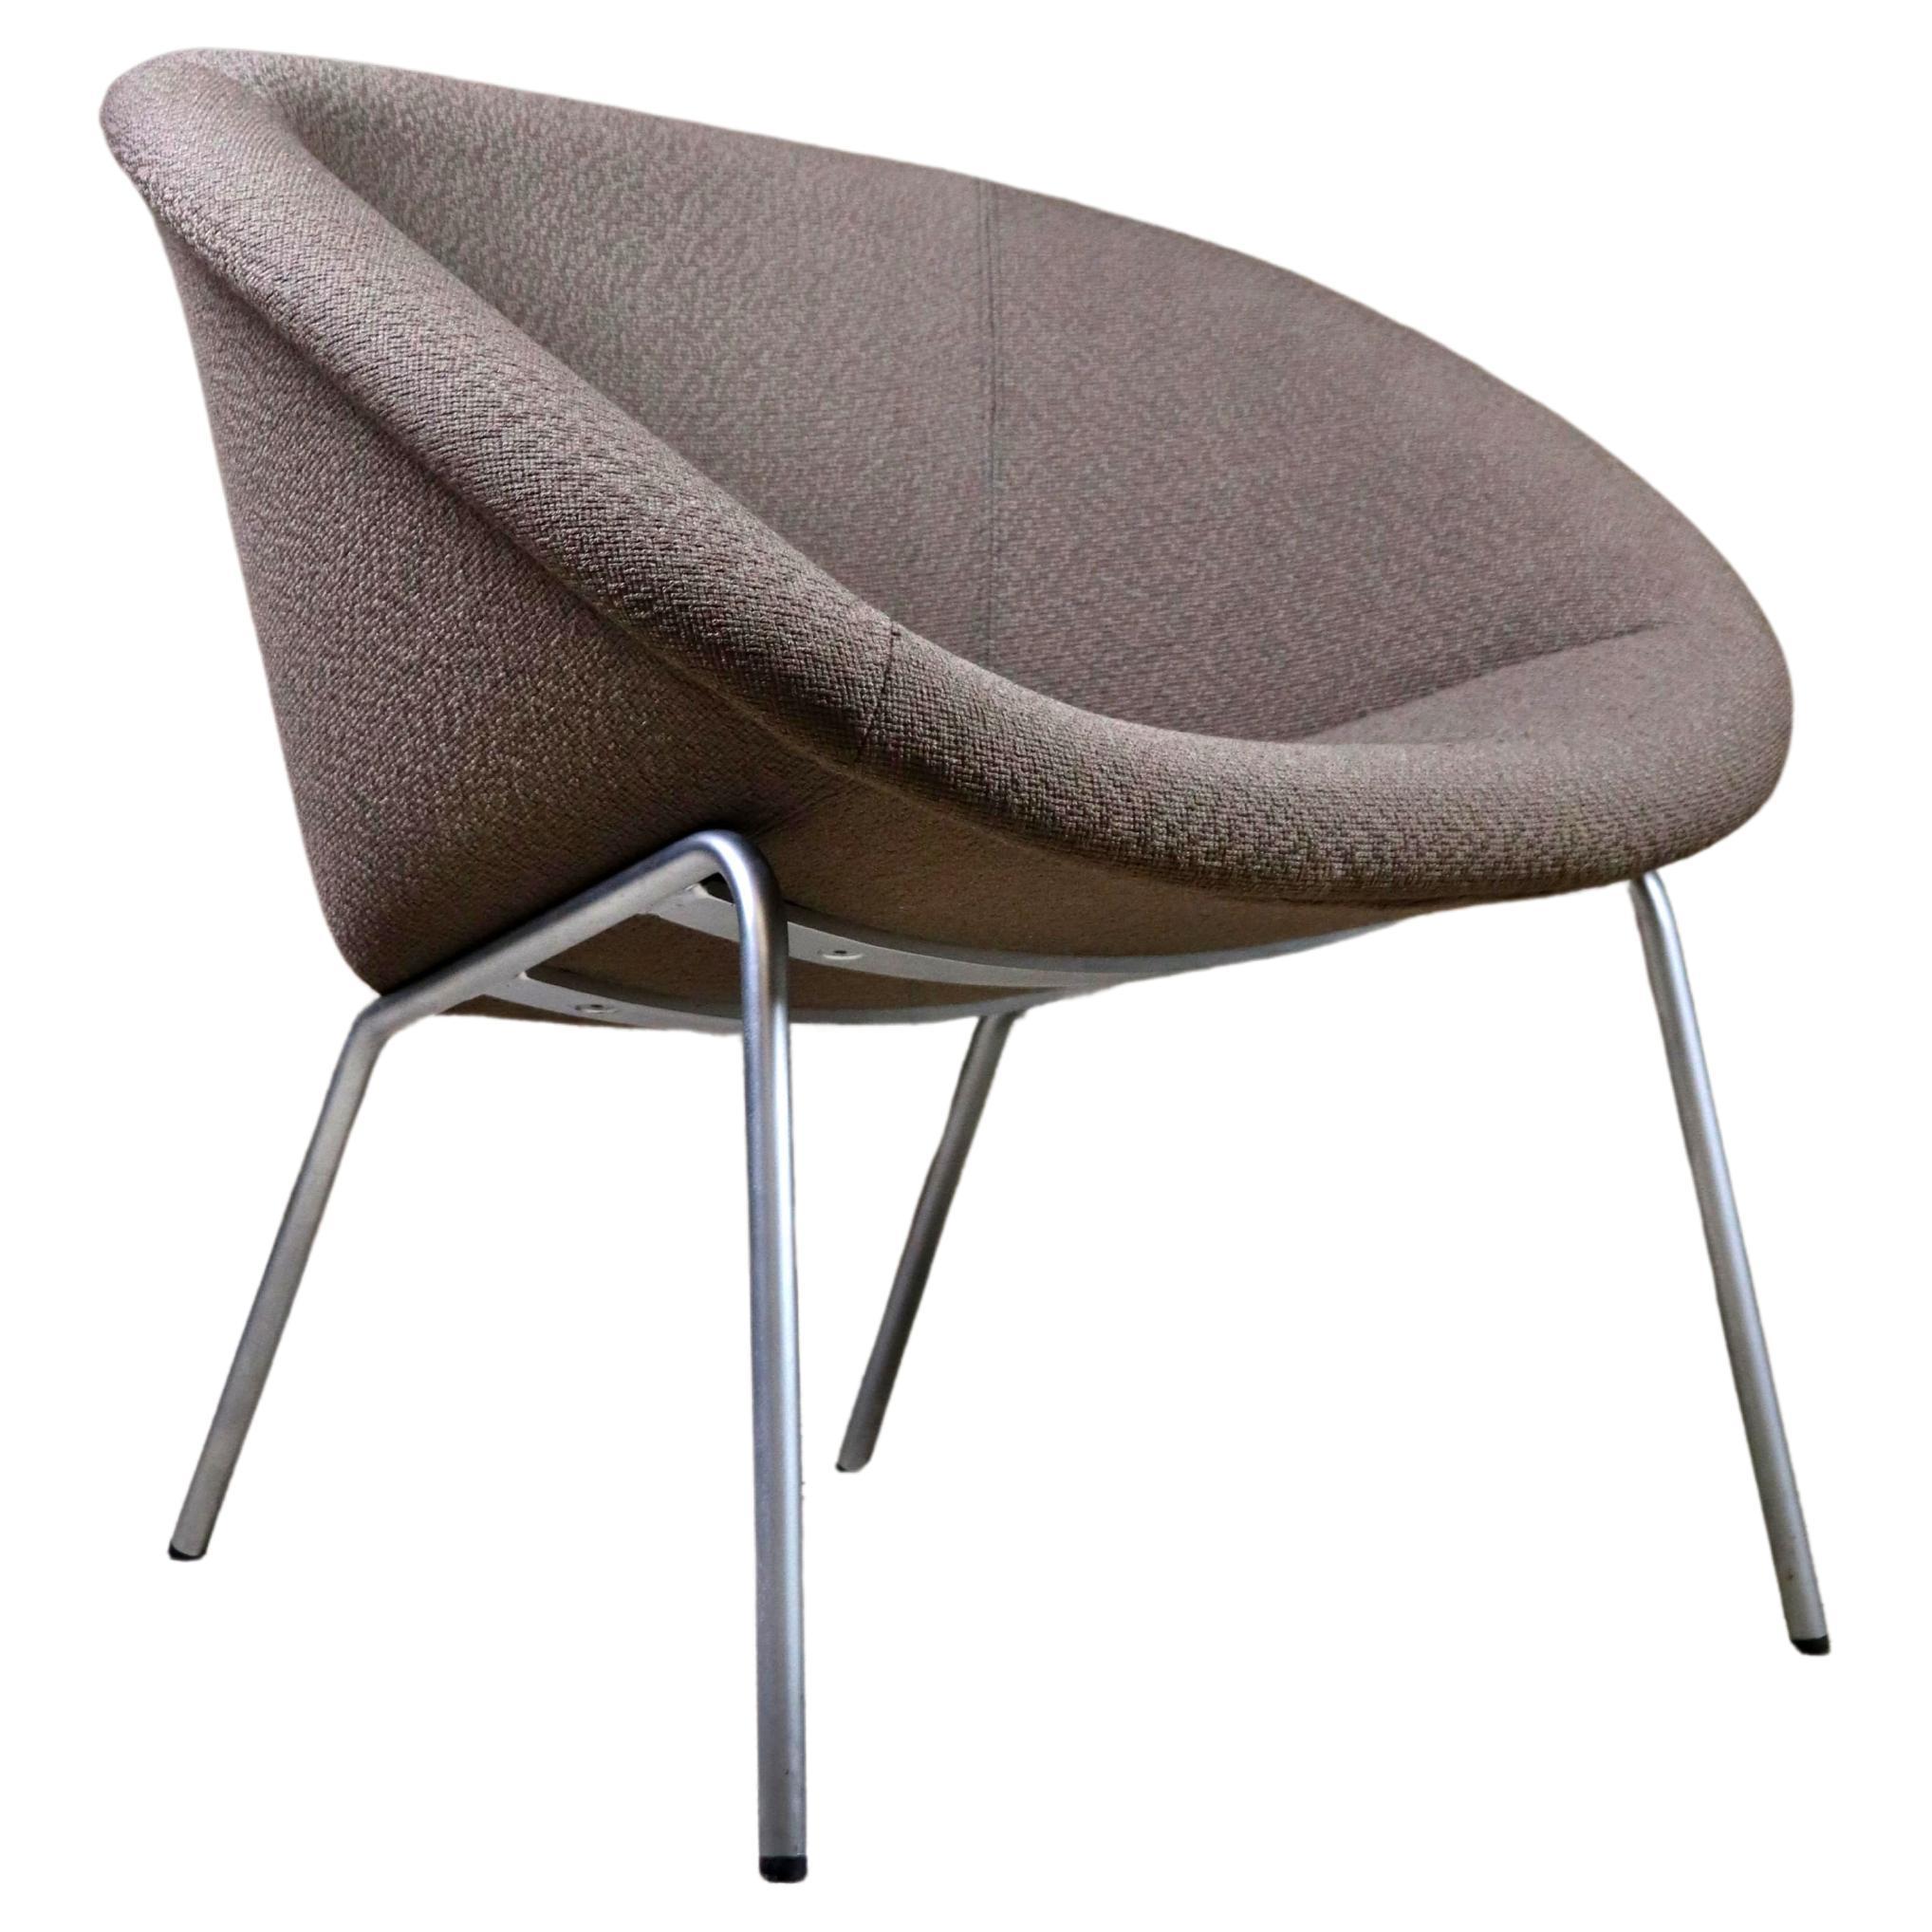 Walter Knoll 369 fauteuil